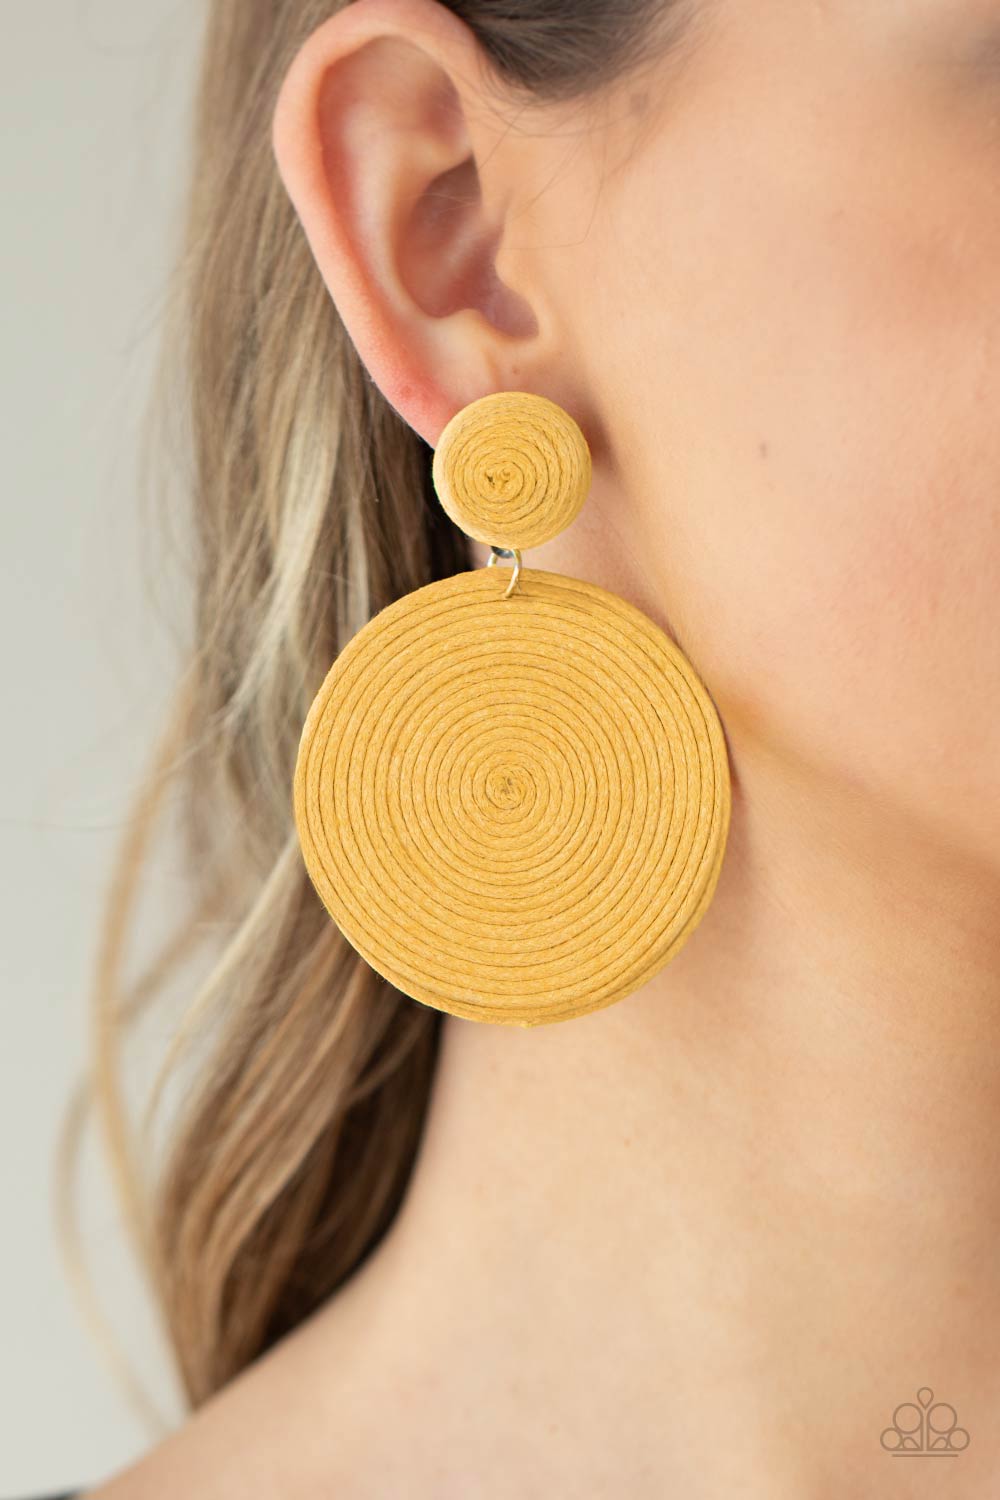 Circulate The Room Yellow Woven Post Earrings - Paparazzi Accessories- lightbox - CarasShop.com - $5 Jewelry by Cara Jewels